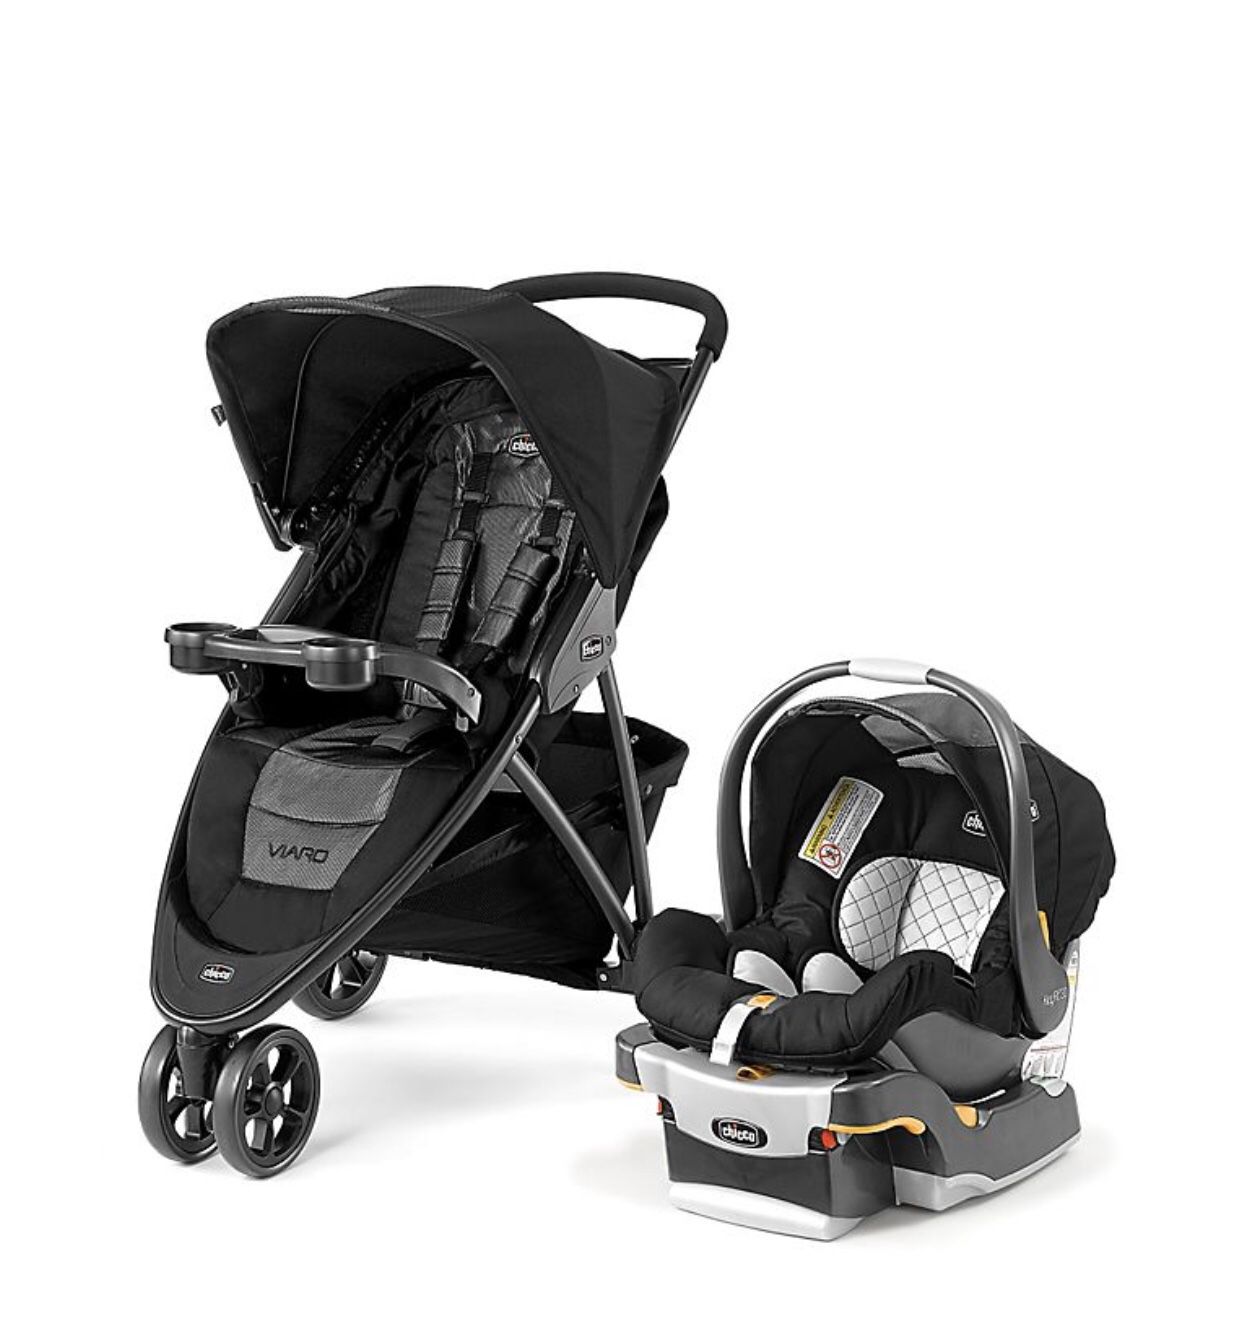 Chicco Viaro 3 Wheel Travel System Stroller w/ KeyFit 30 Car Seat Black NEW ONLY THIS WEEKEND HAPPY Halloween